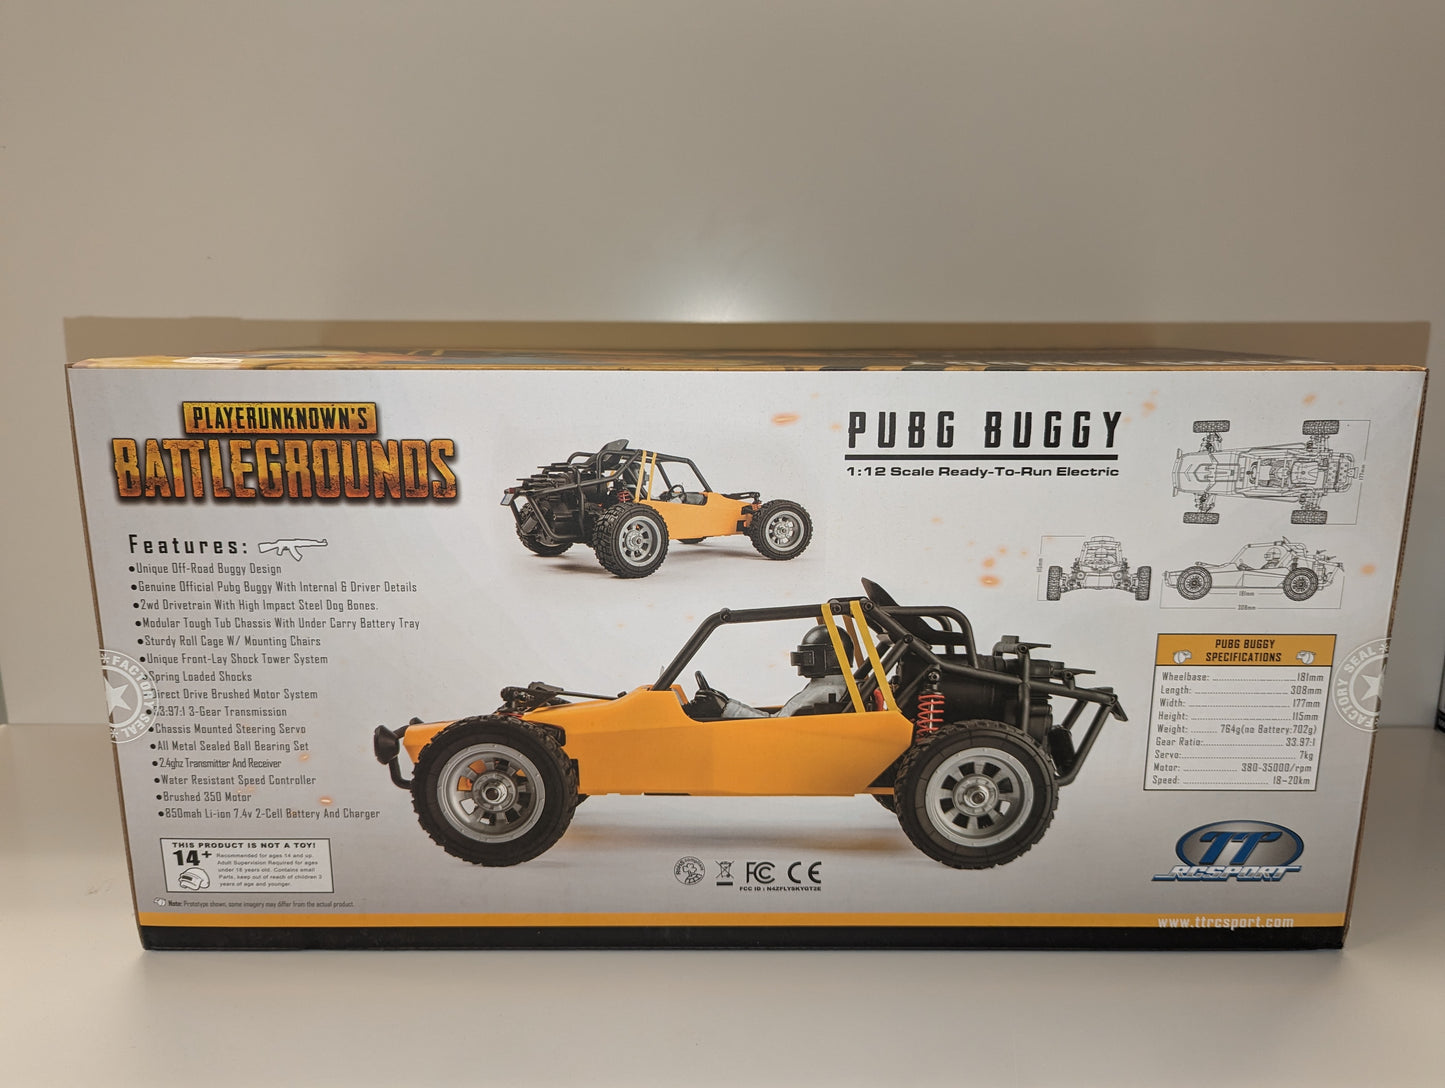 RC SPORT PUBG 2WD SINGLE SEAT 1/12 BUGGY RTR